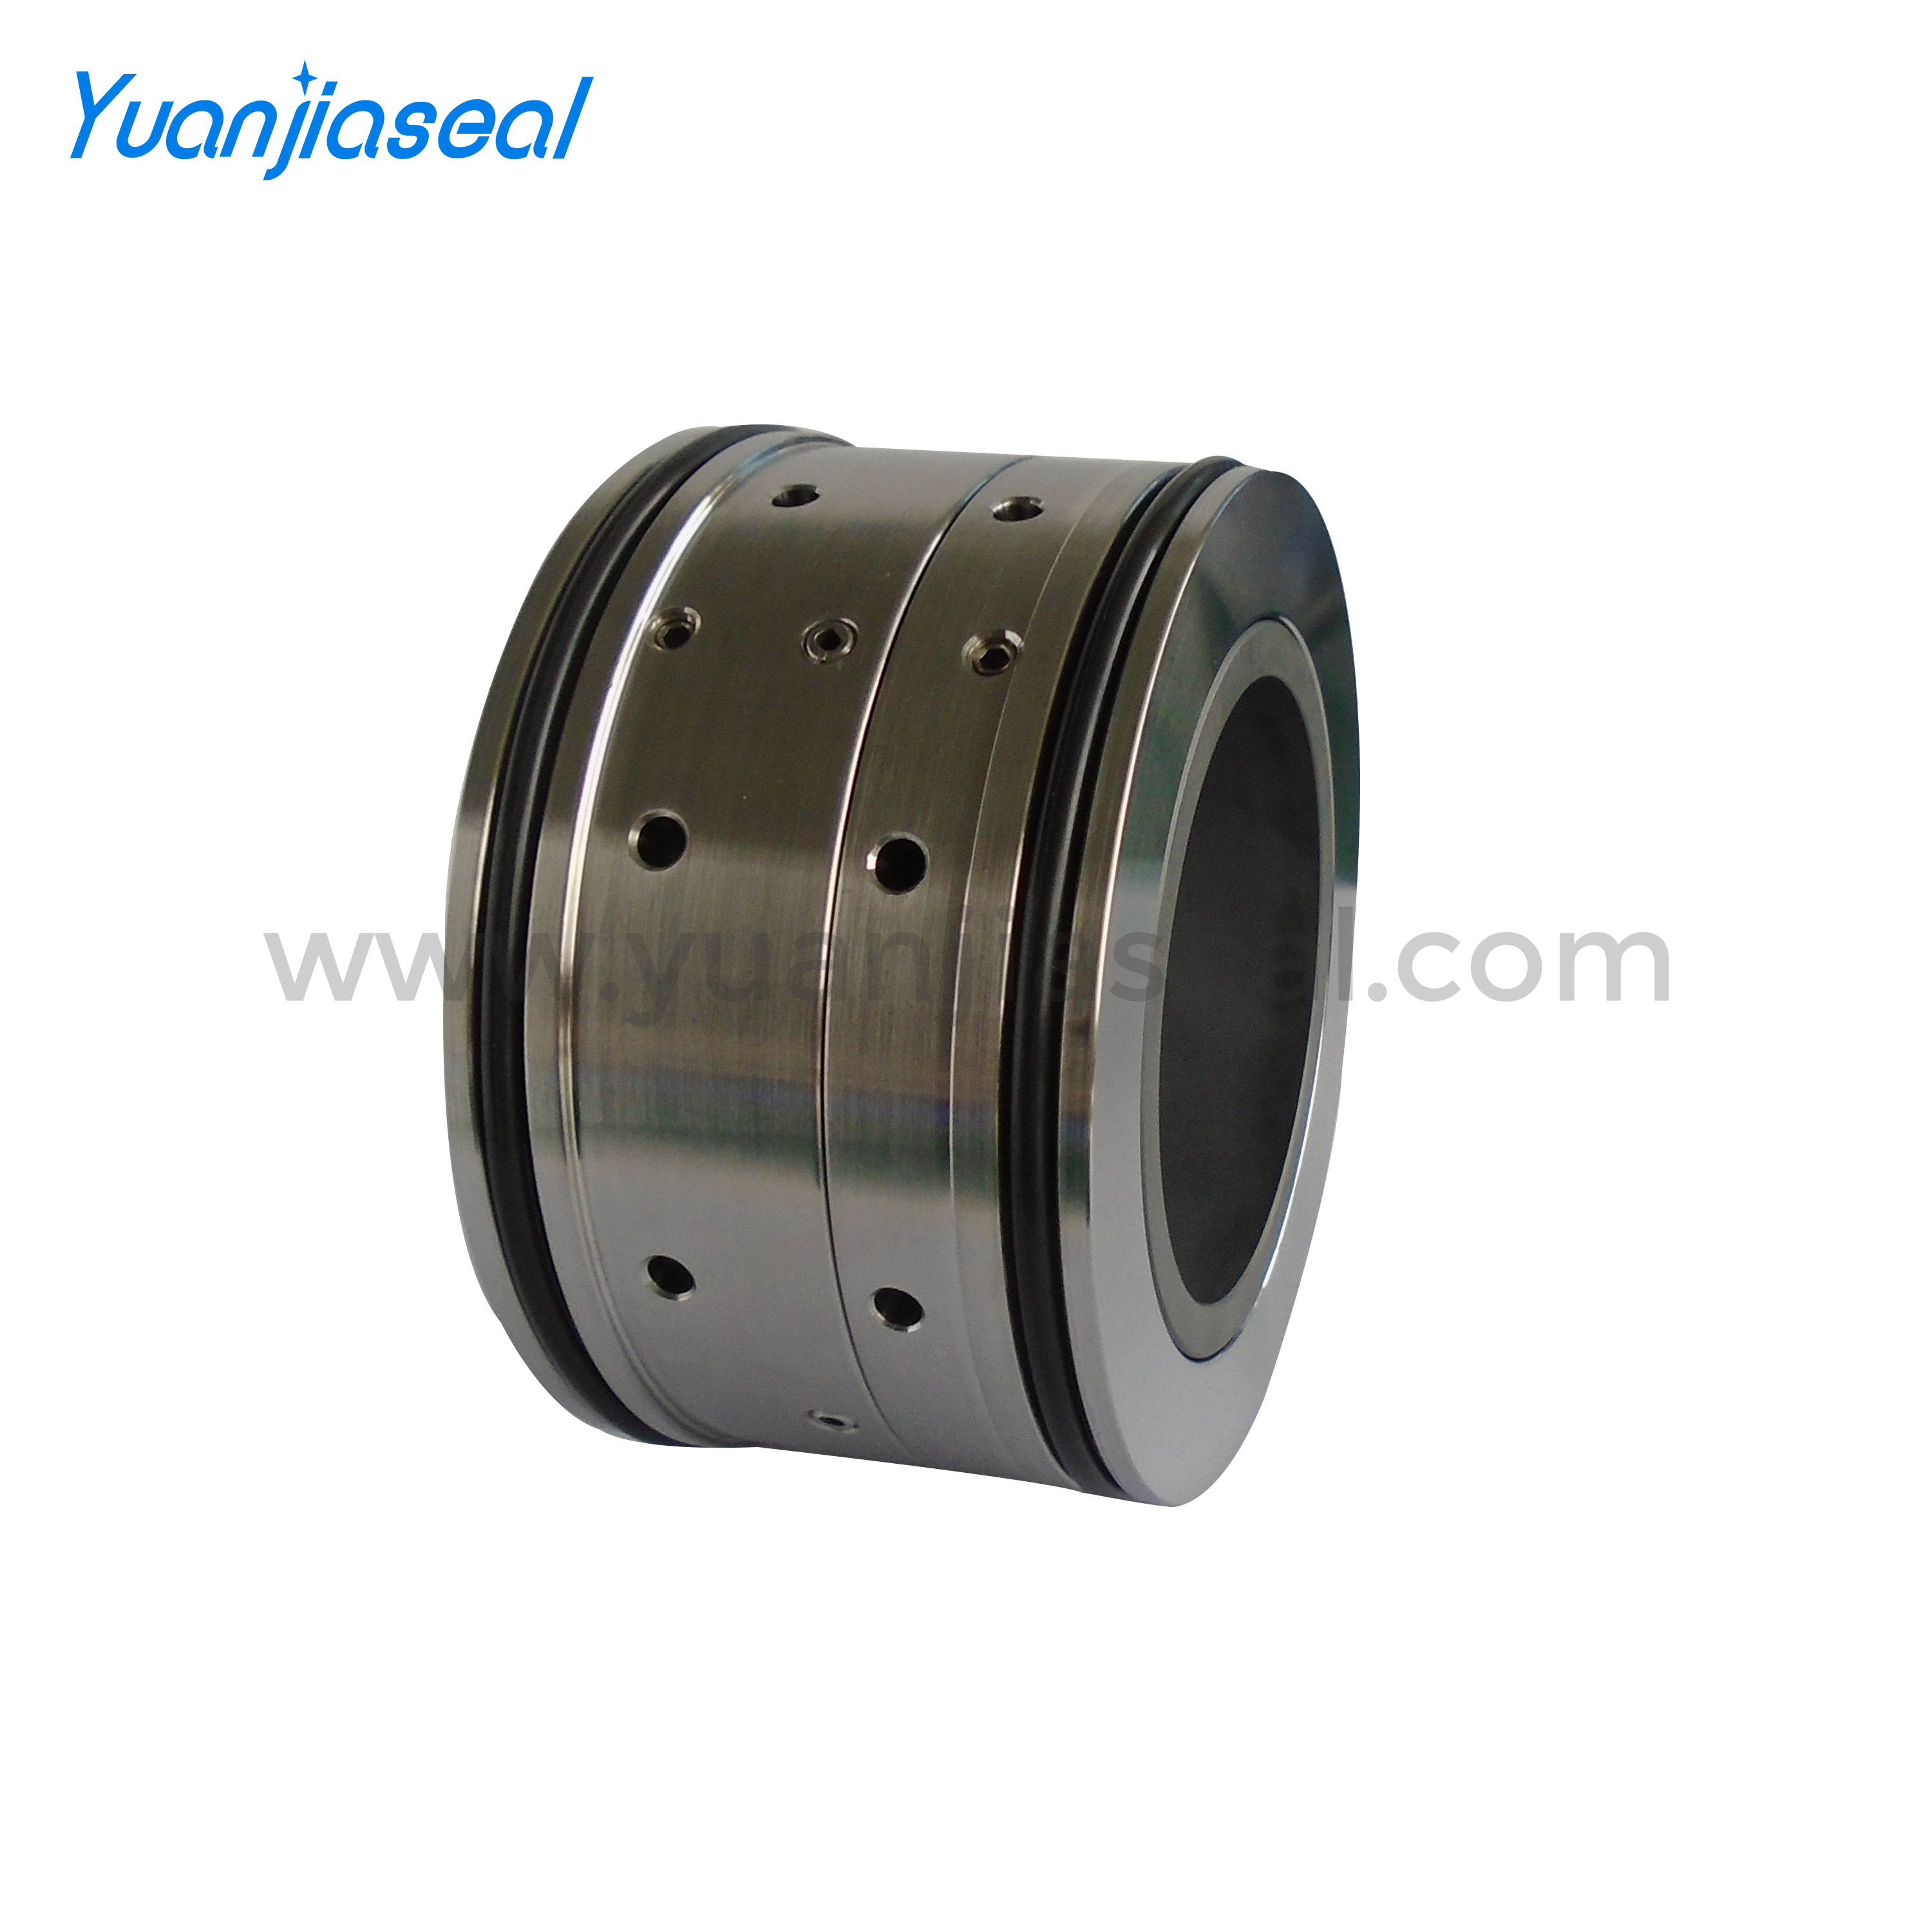 YJEMU Mechanical Seal For EMU Pumps (35mm, 50mm And 75mm)